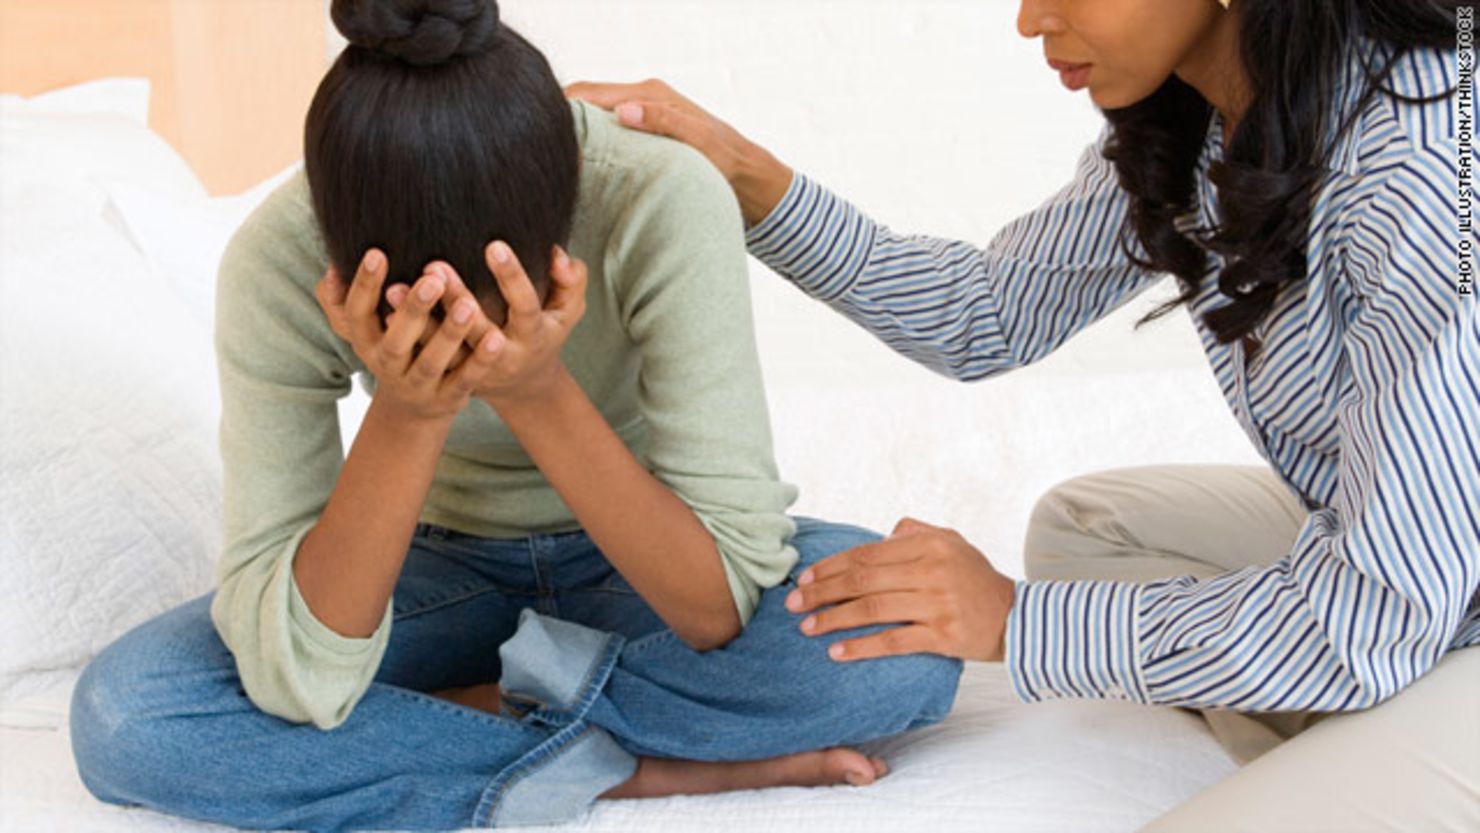 Researchers said African Americans are among the most likely to use corporal punishment on children.